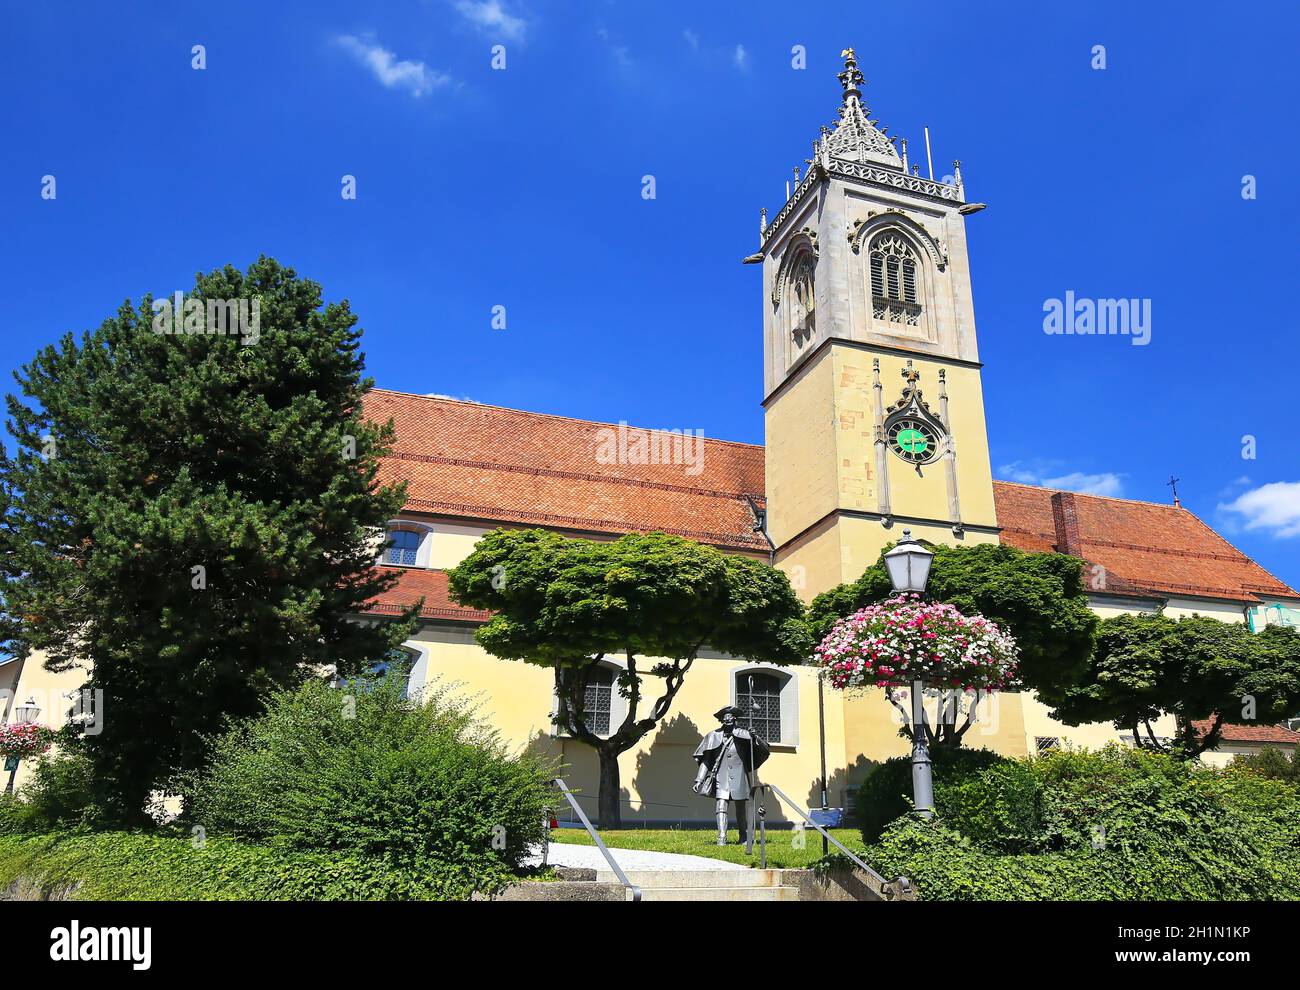 The Sankt Jakobus church is a sight of the town of Pfullendorf Stock Photo